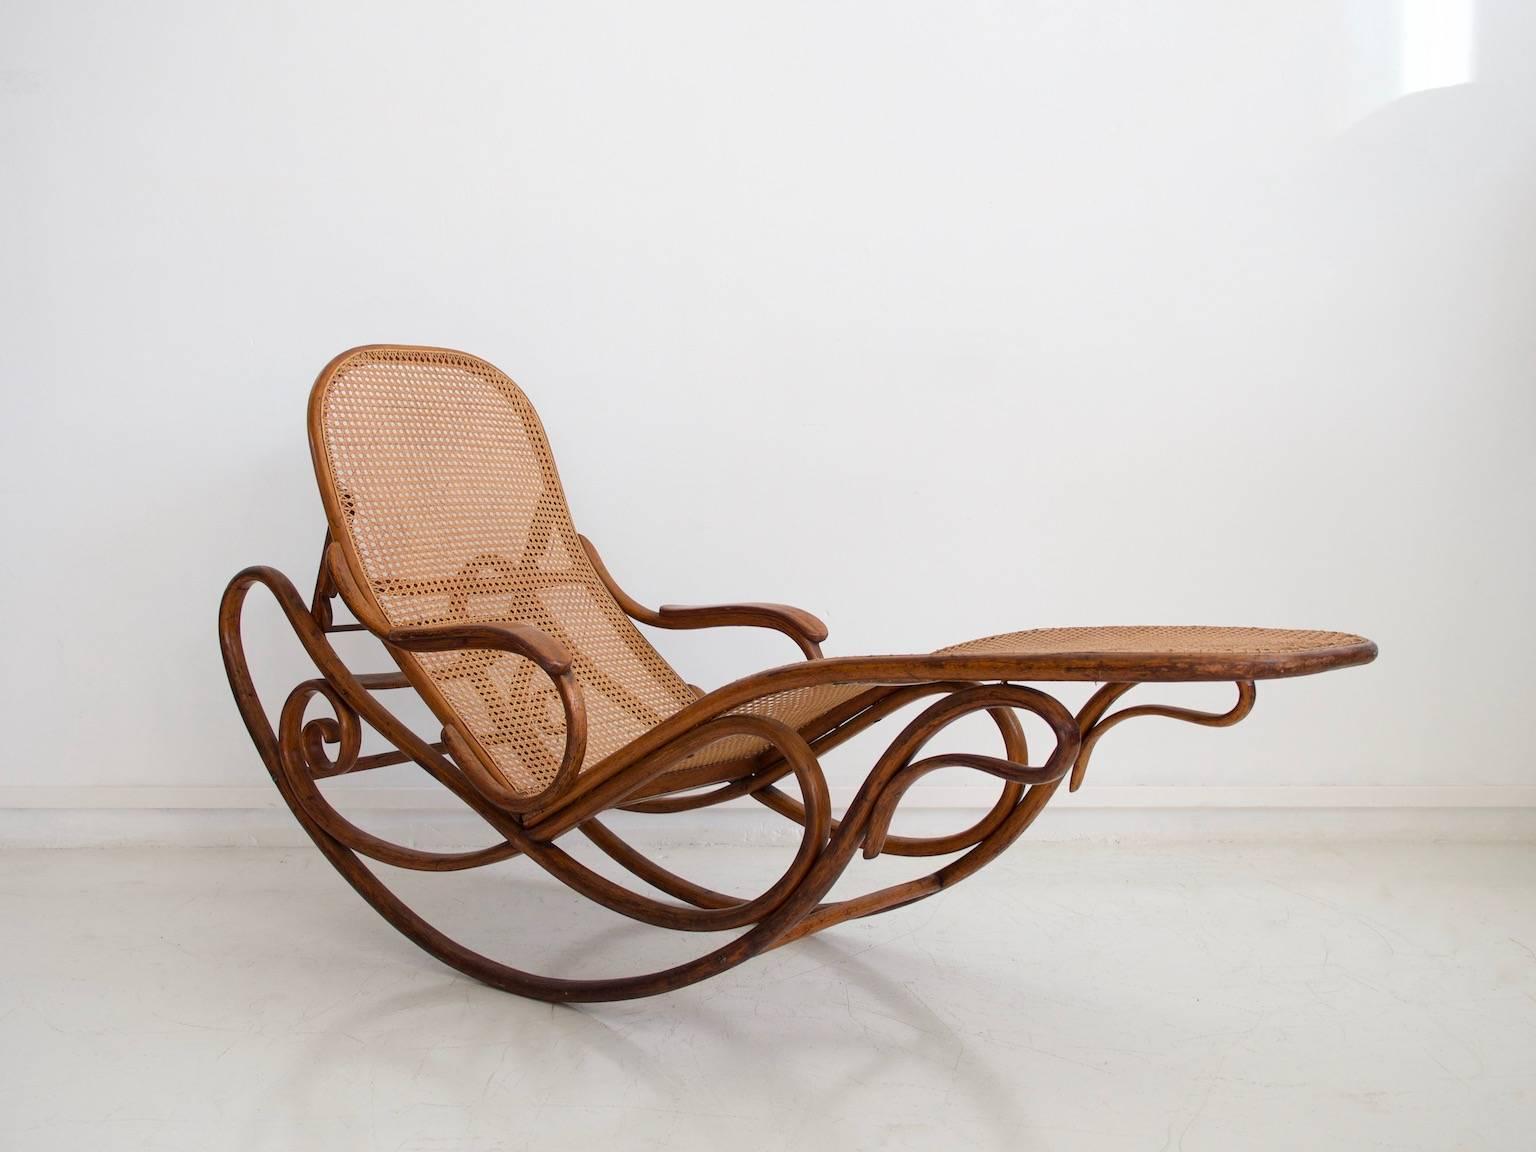 Vienna Secession Thonet Bentwood and Rattan Rocking Chaise Longue Model 7500